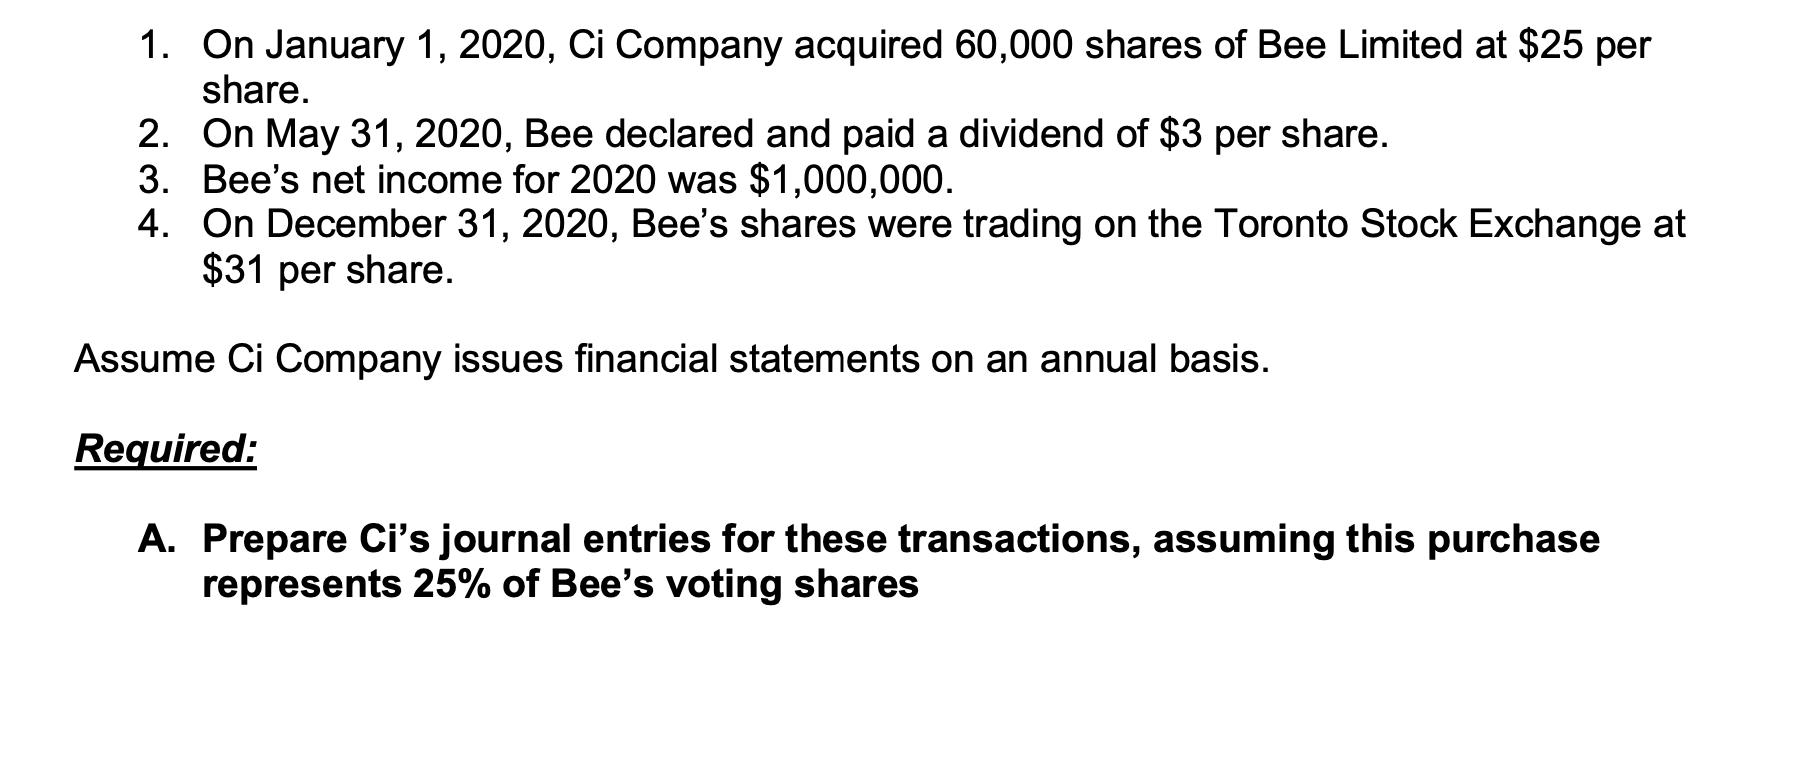 1. On January 1, 2020, Ci Company acquired 60,000 shares of Bee Limited at $25 per share. 2. On May 31, 2020, Bee declared an